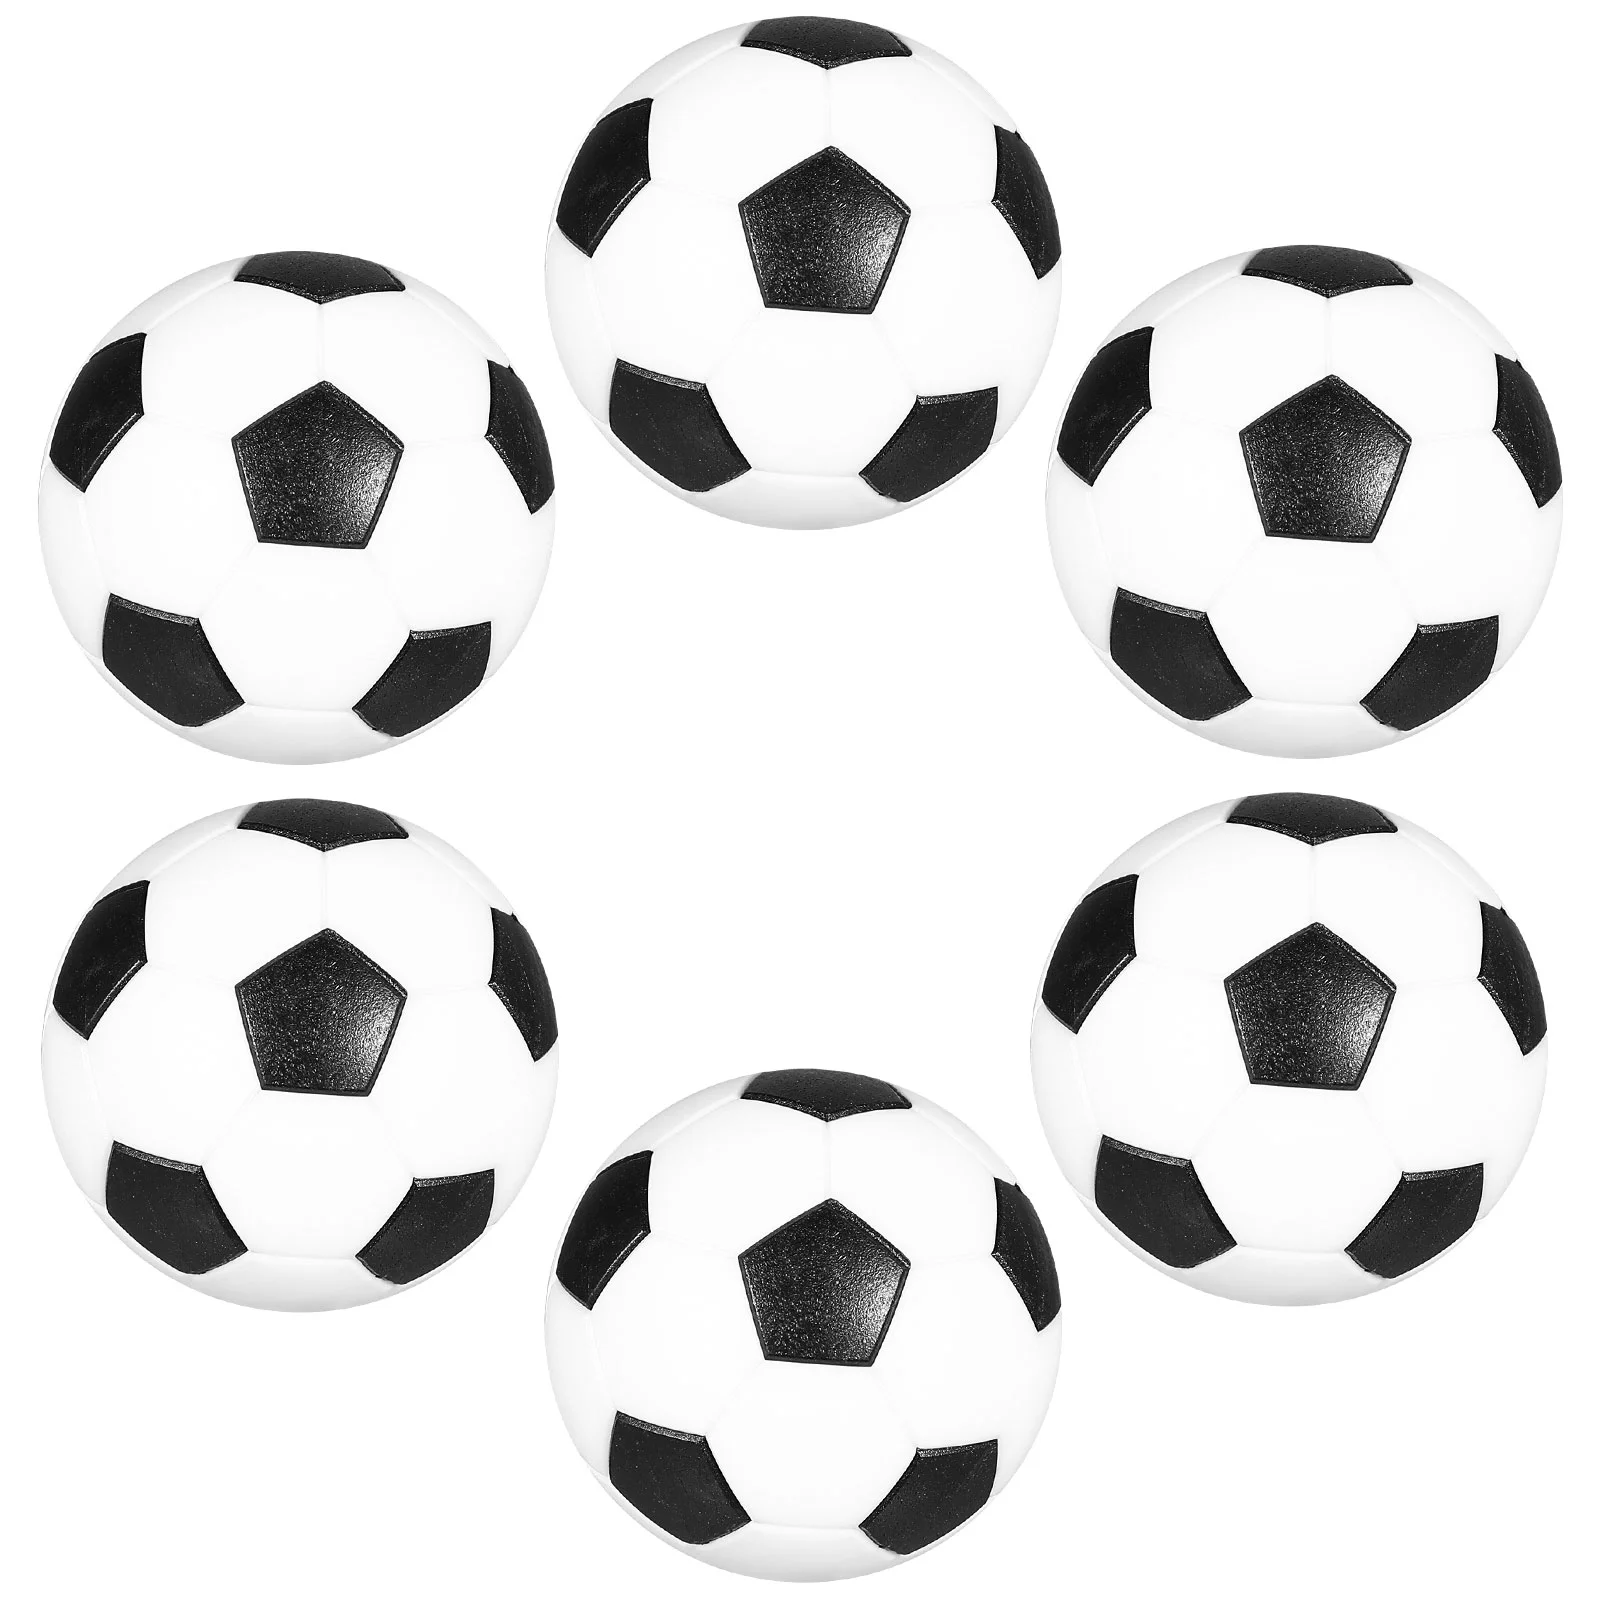 32mm Table Soccer Footballs Replacements Mini Black and White Soccer Balls black and white football Table Soccer playiing